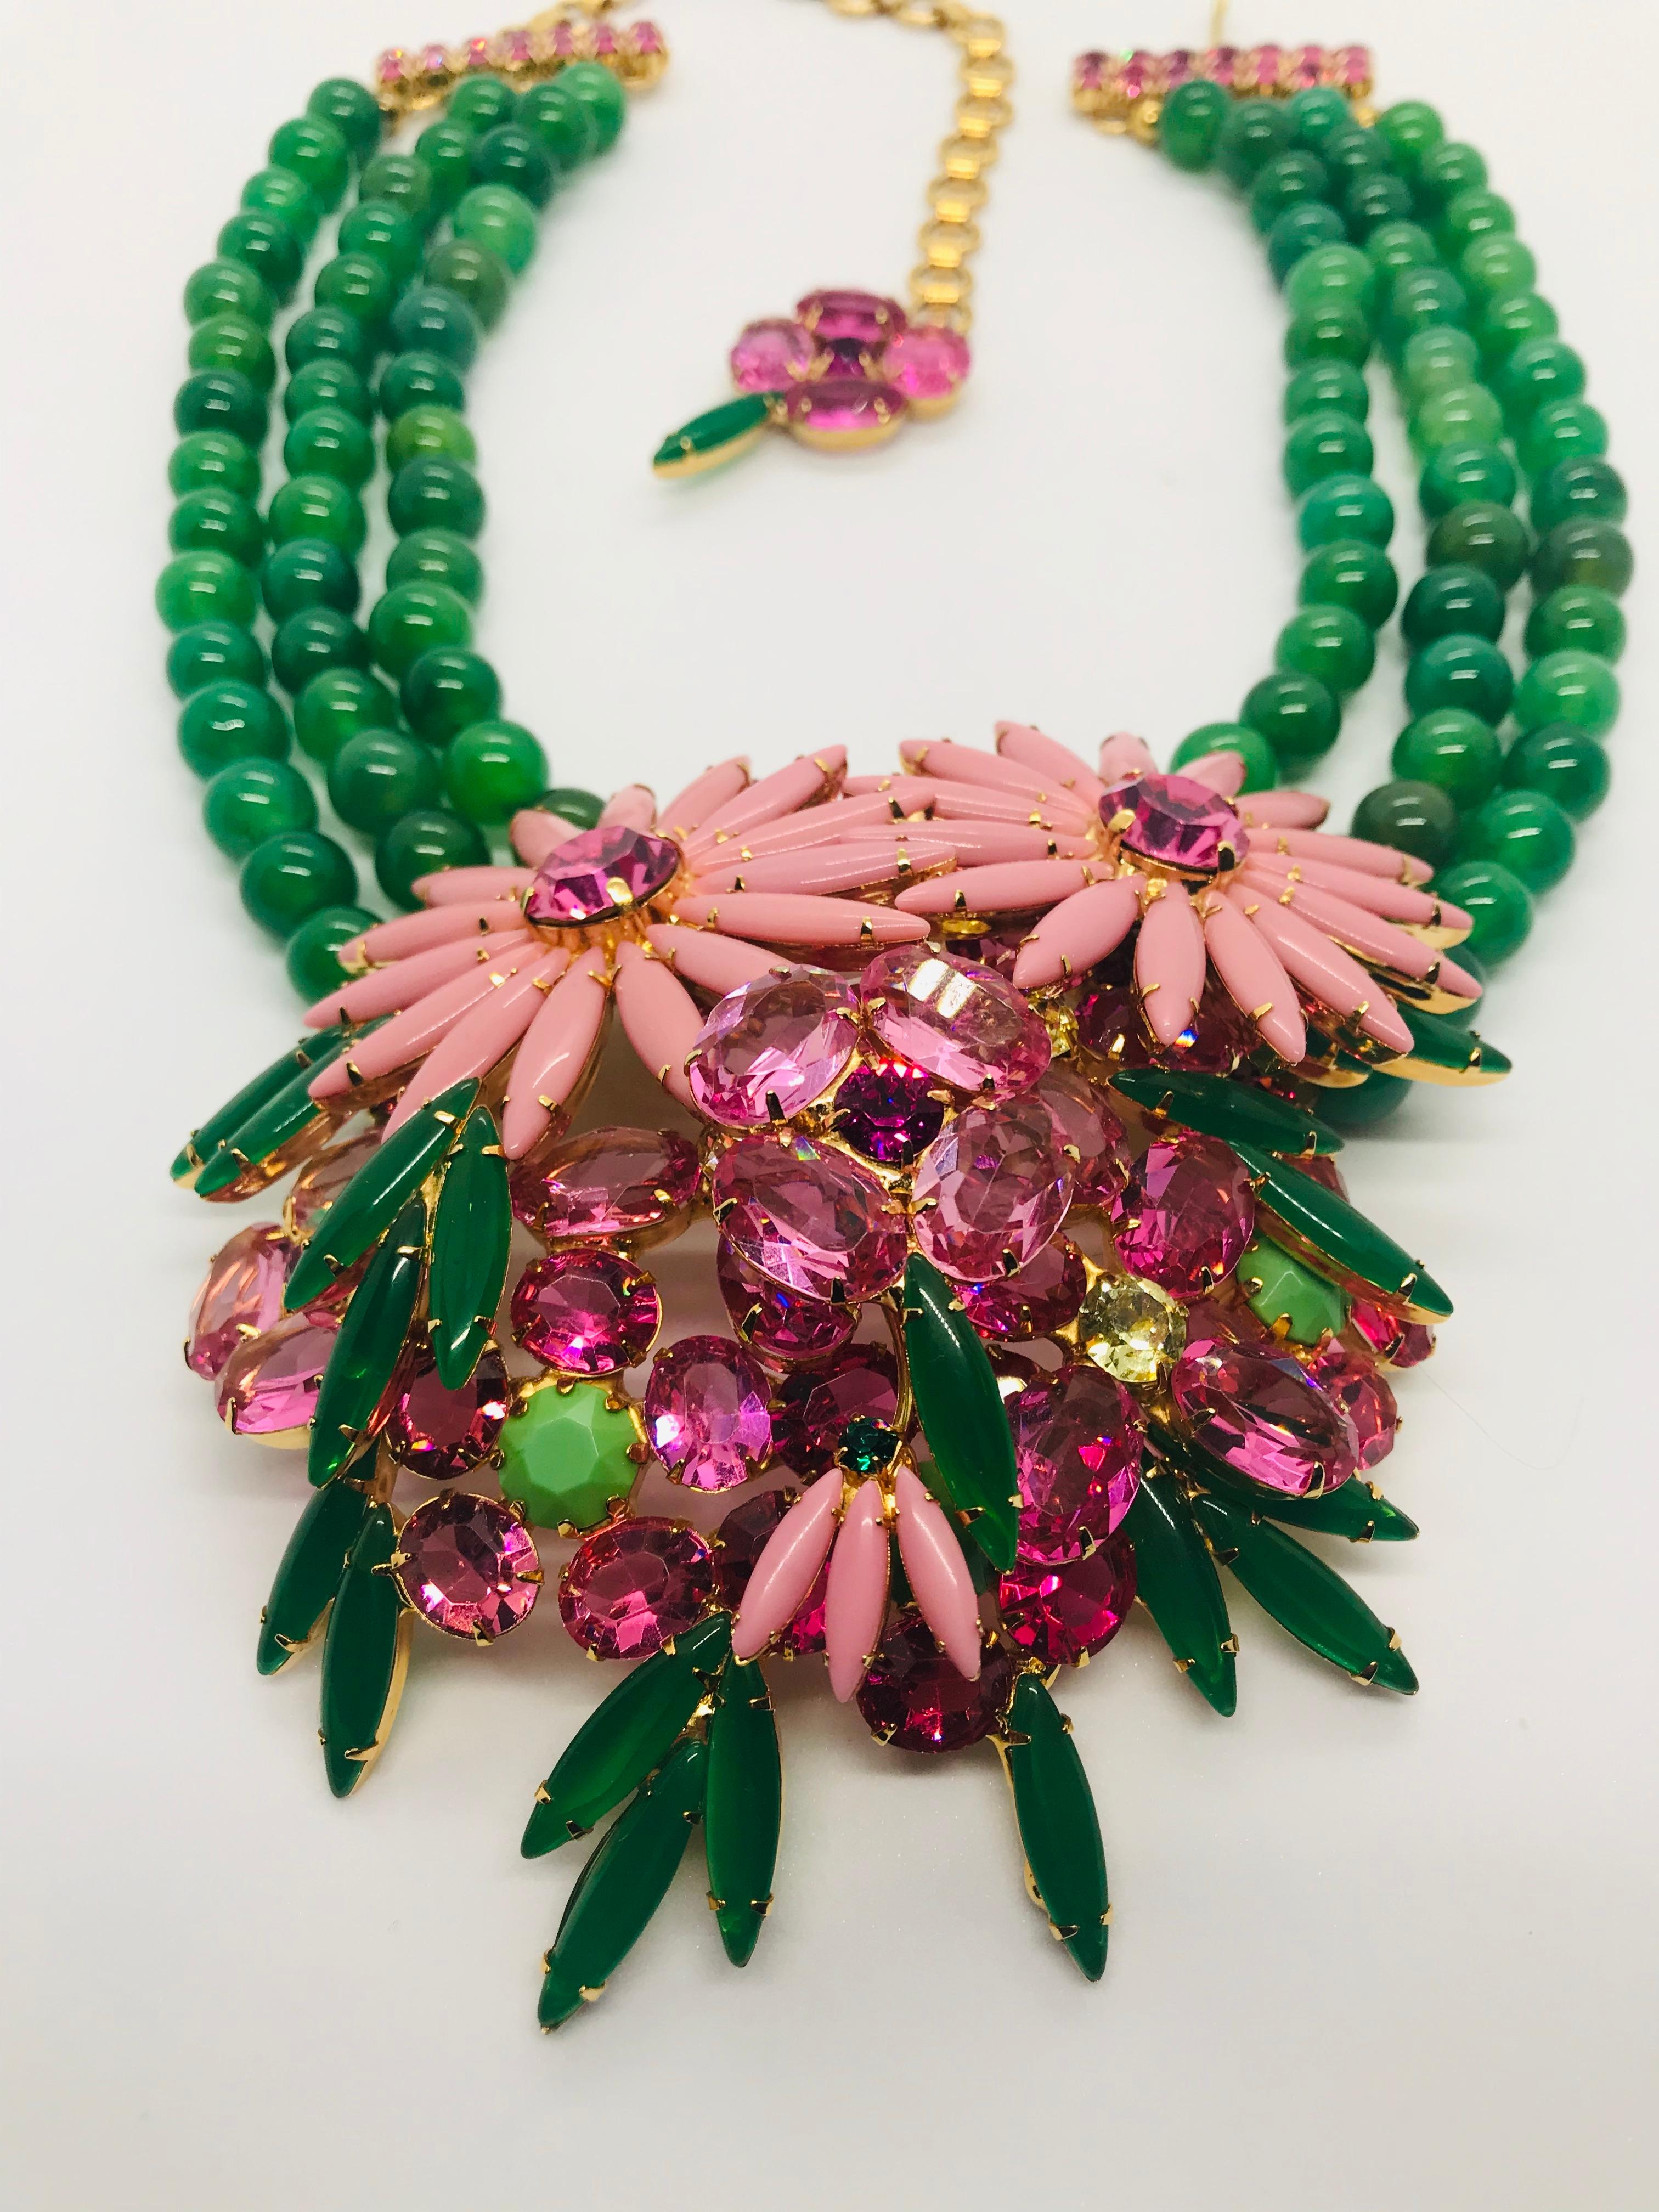 One of the most exciting necklaces we have created is our multi pink Austrian crystal floral cluster necklace, featuring beautiful semi-precious green fire agate beads.  The three dimensional floral cluster at the center of this necklace features